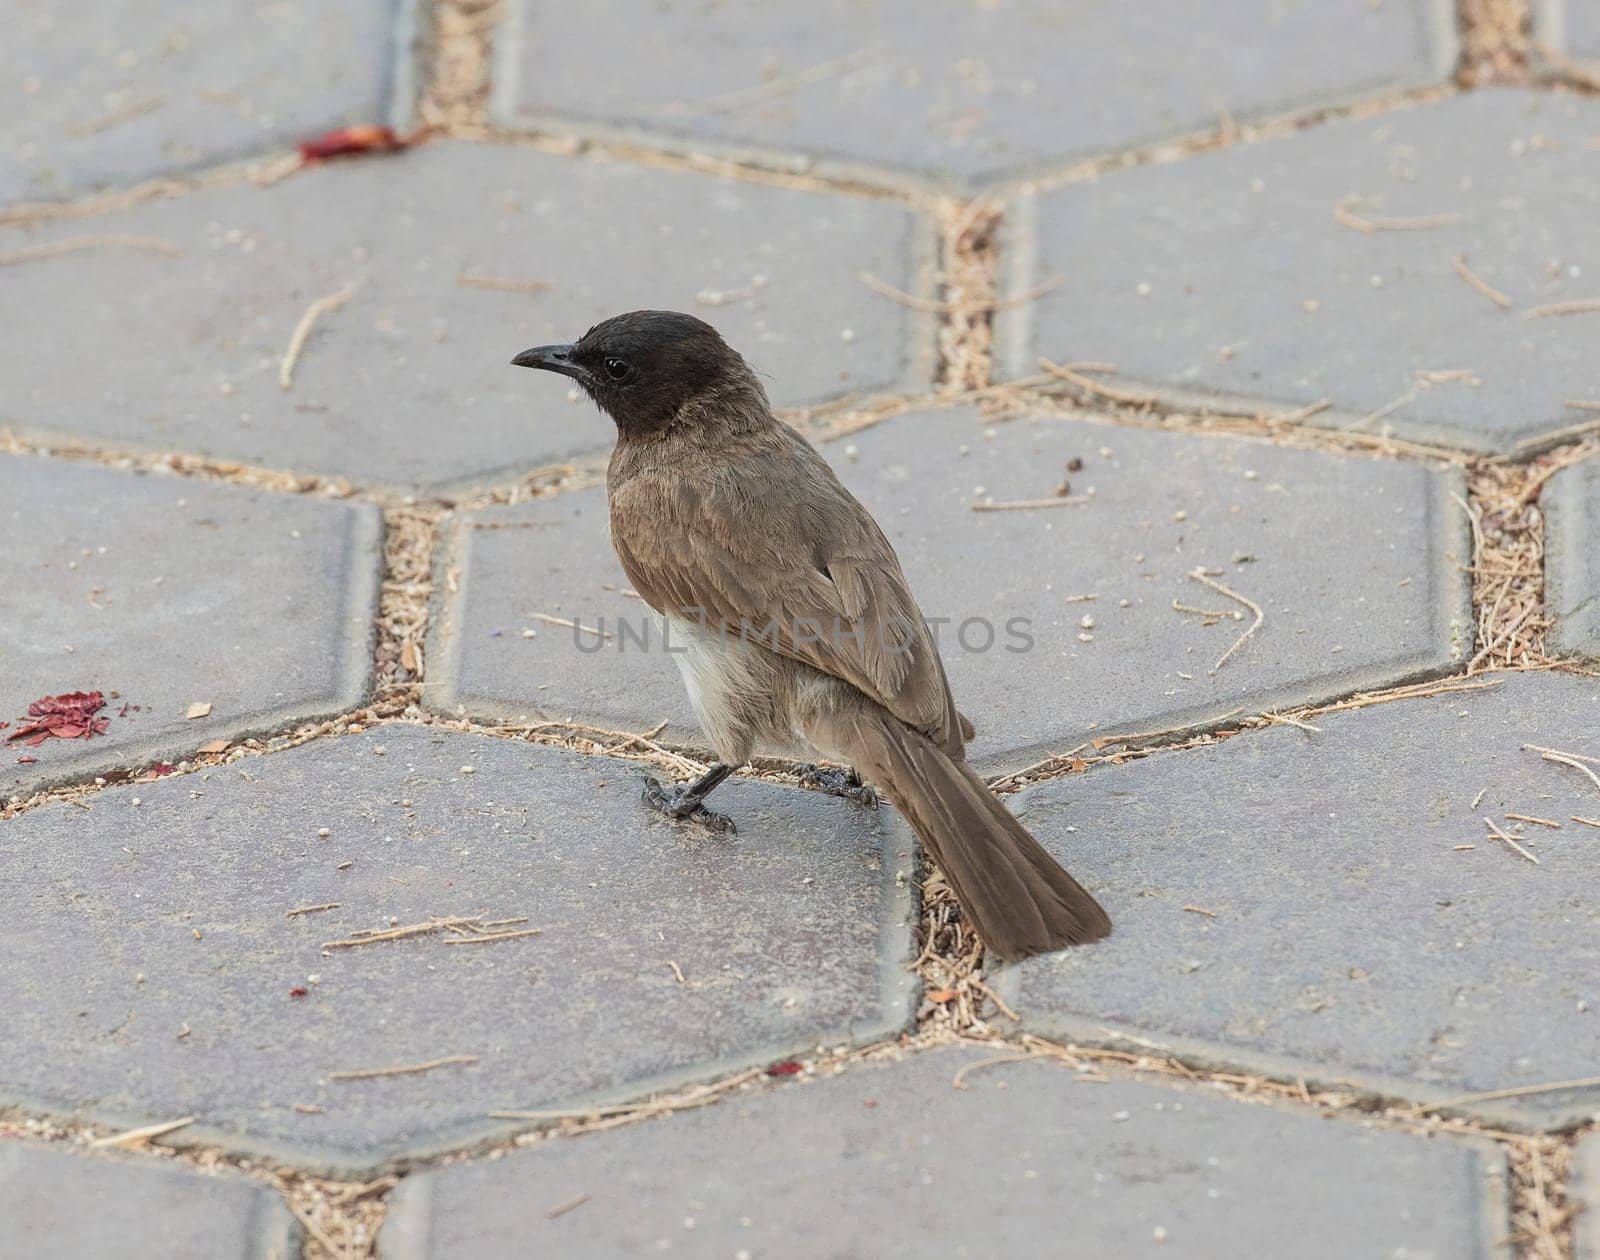 Dark-eyed junco sparrow stood on a stone paved footpath by paulvinten